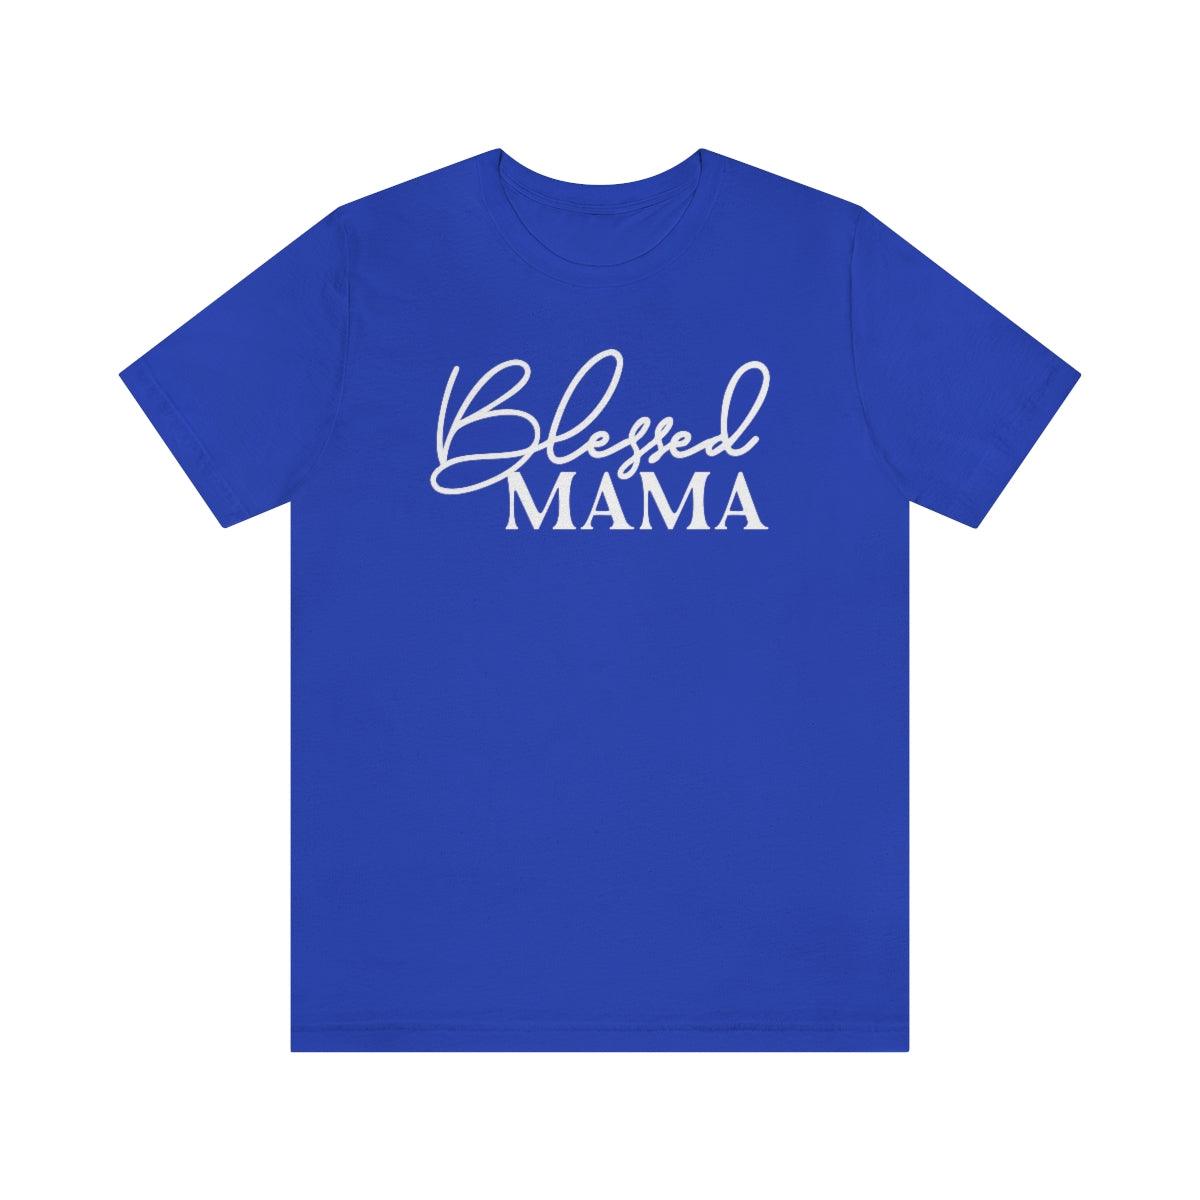 Blessed Mama Short Sleeve Tee - Crystal Rose Design Co.